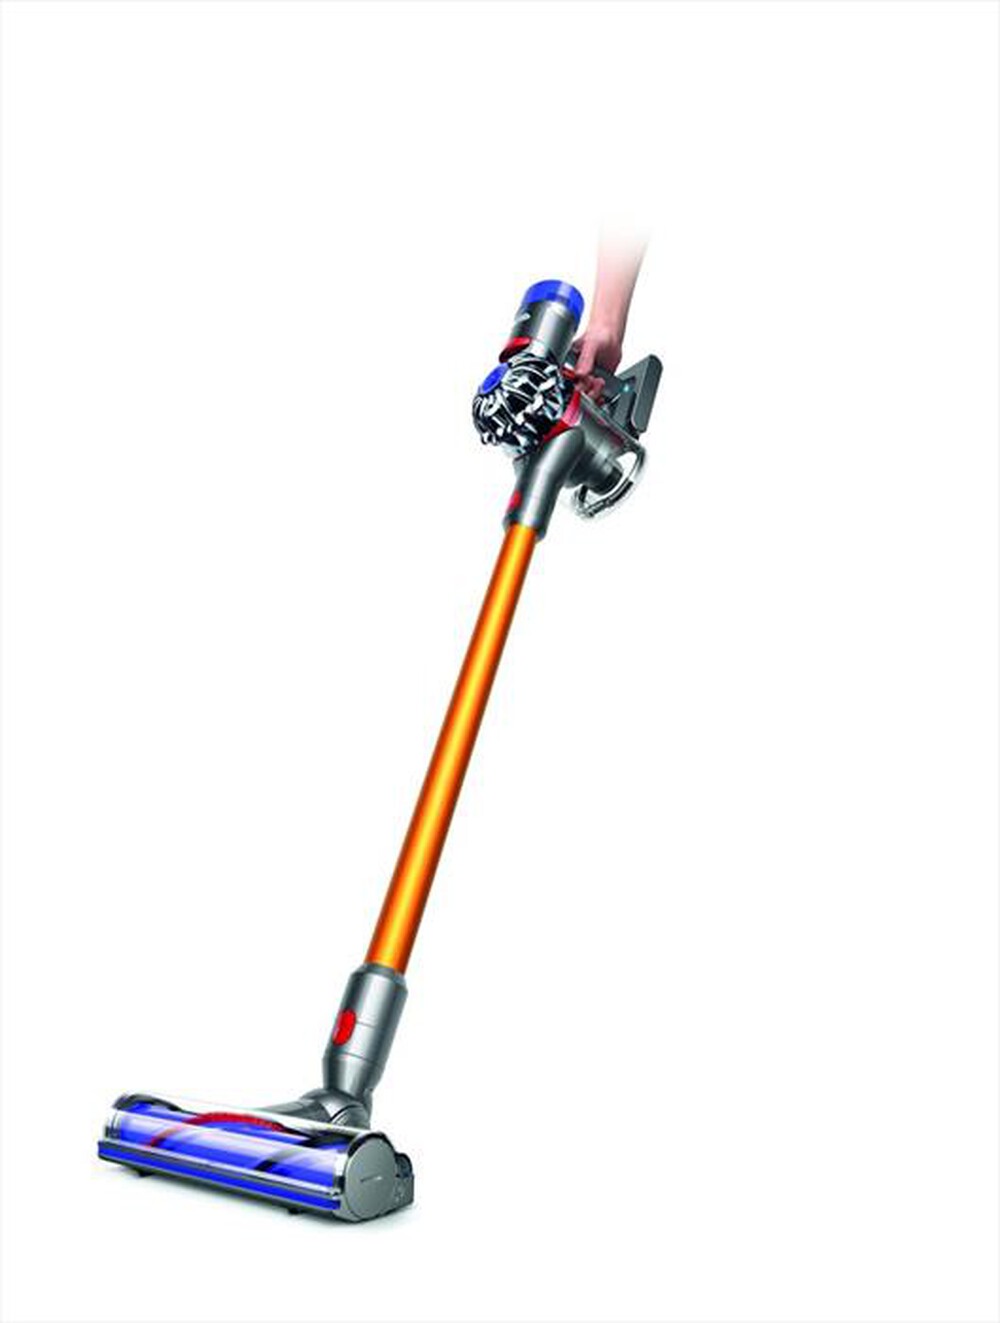 "DYSON - V8 ABSOLUTE +"